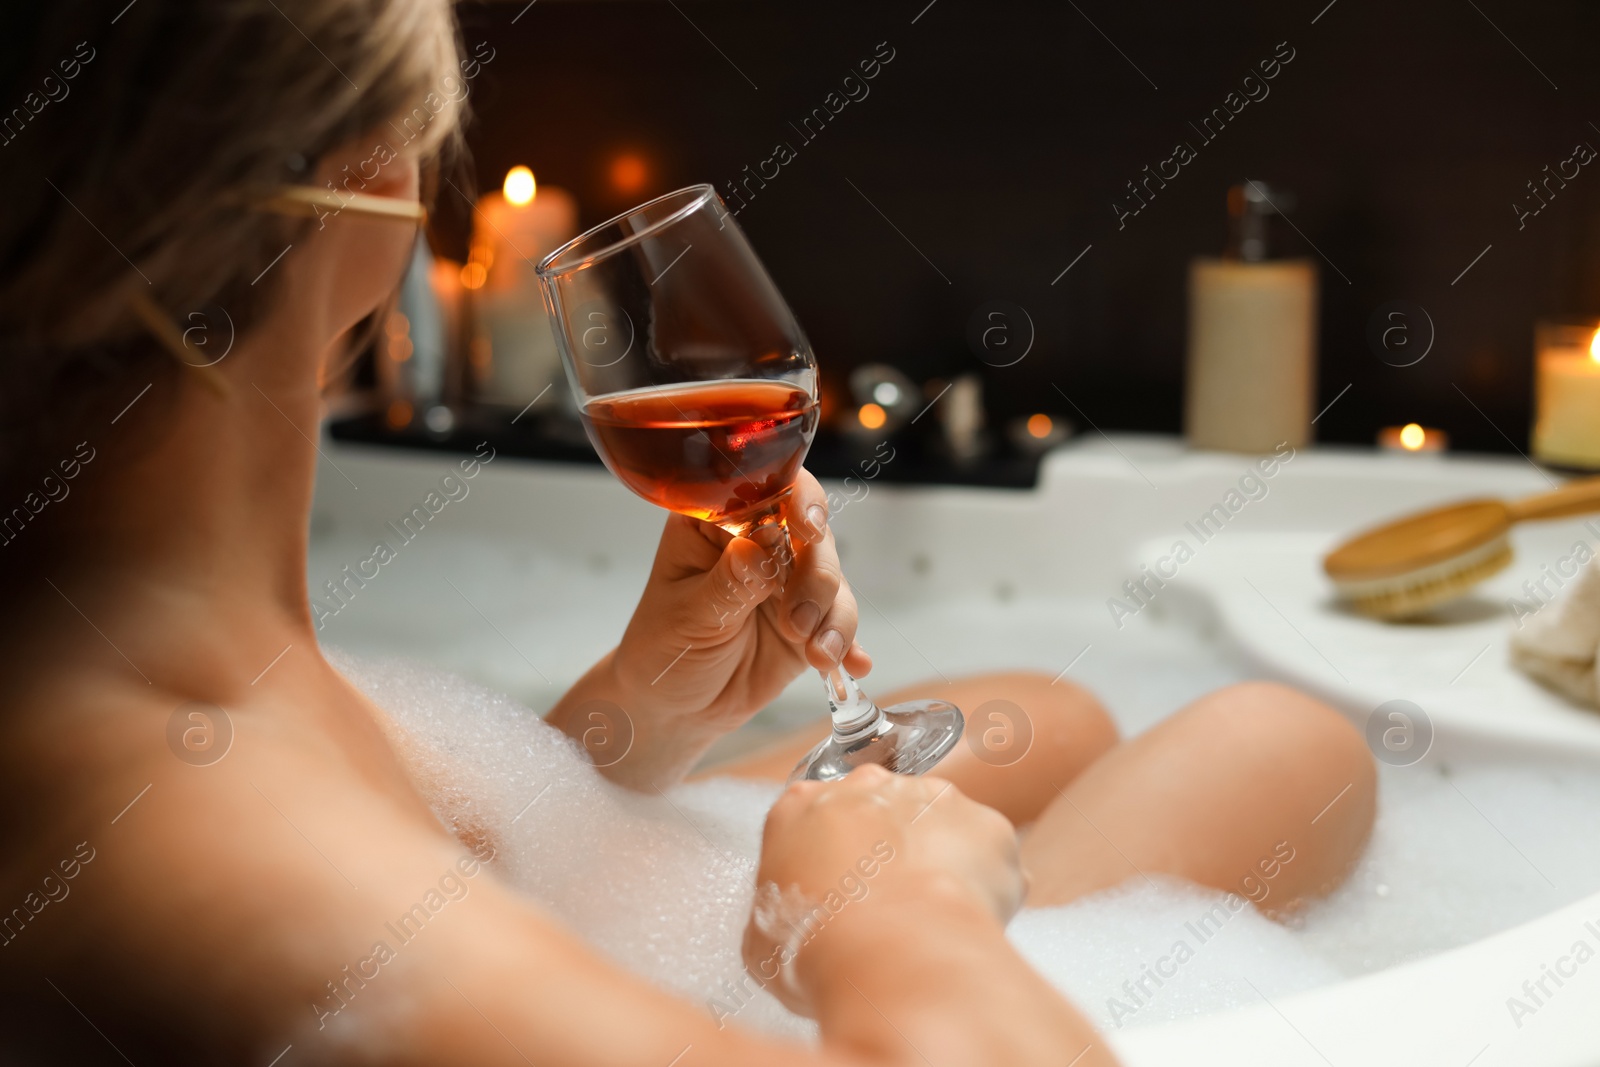 Photo of Woman drinking wine while taking bubble bath, closeup. Romantic atmosphere